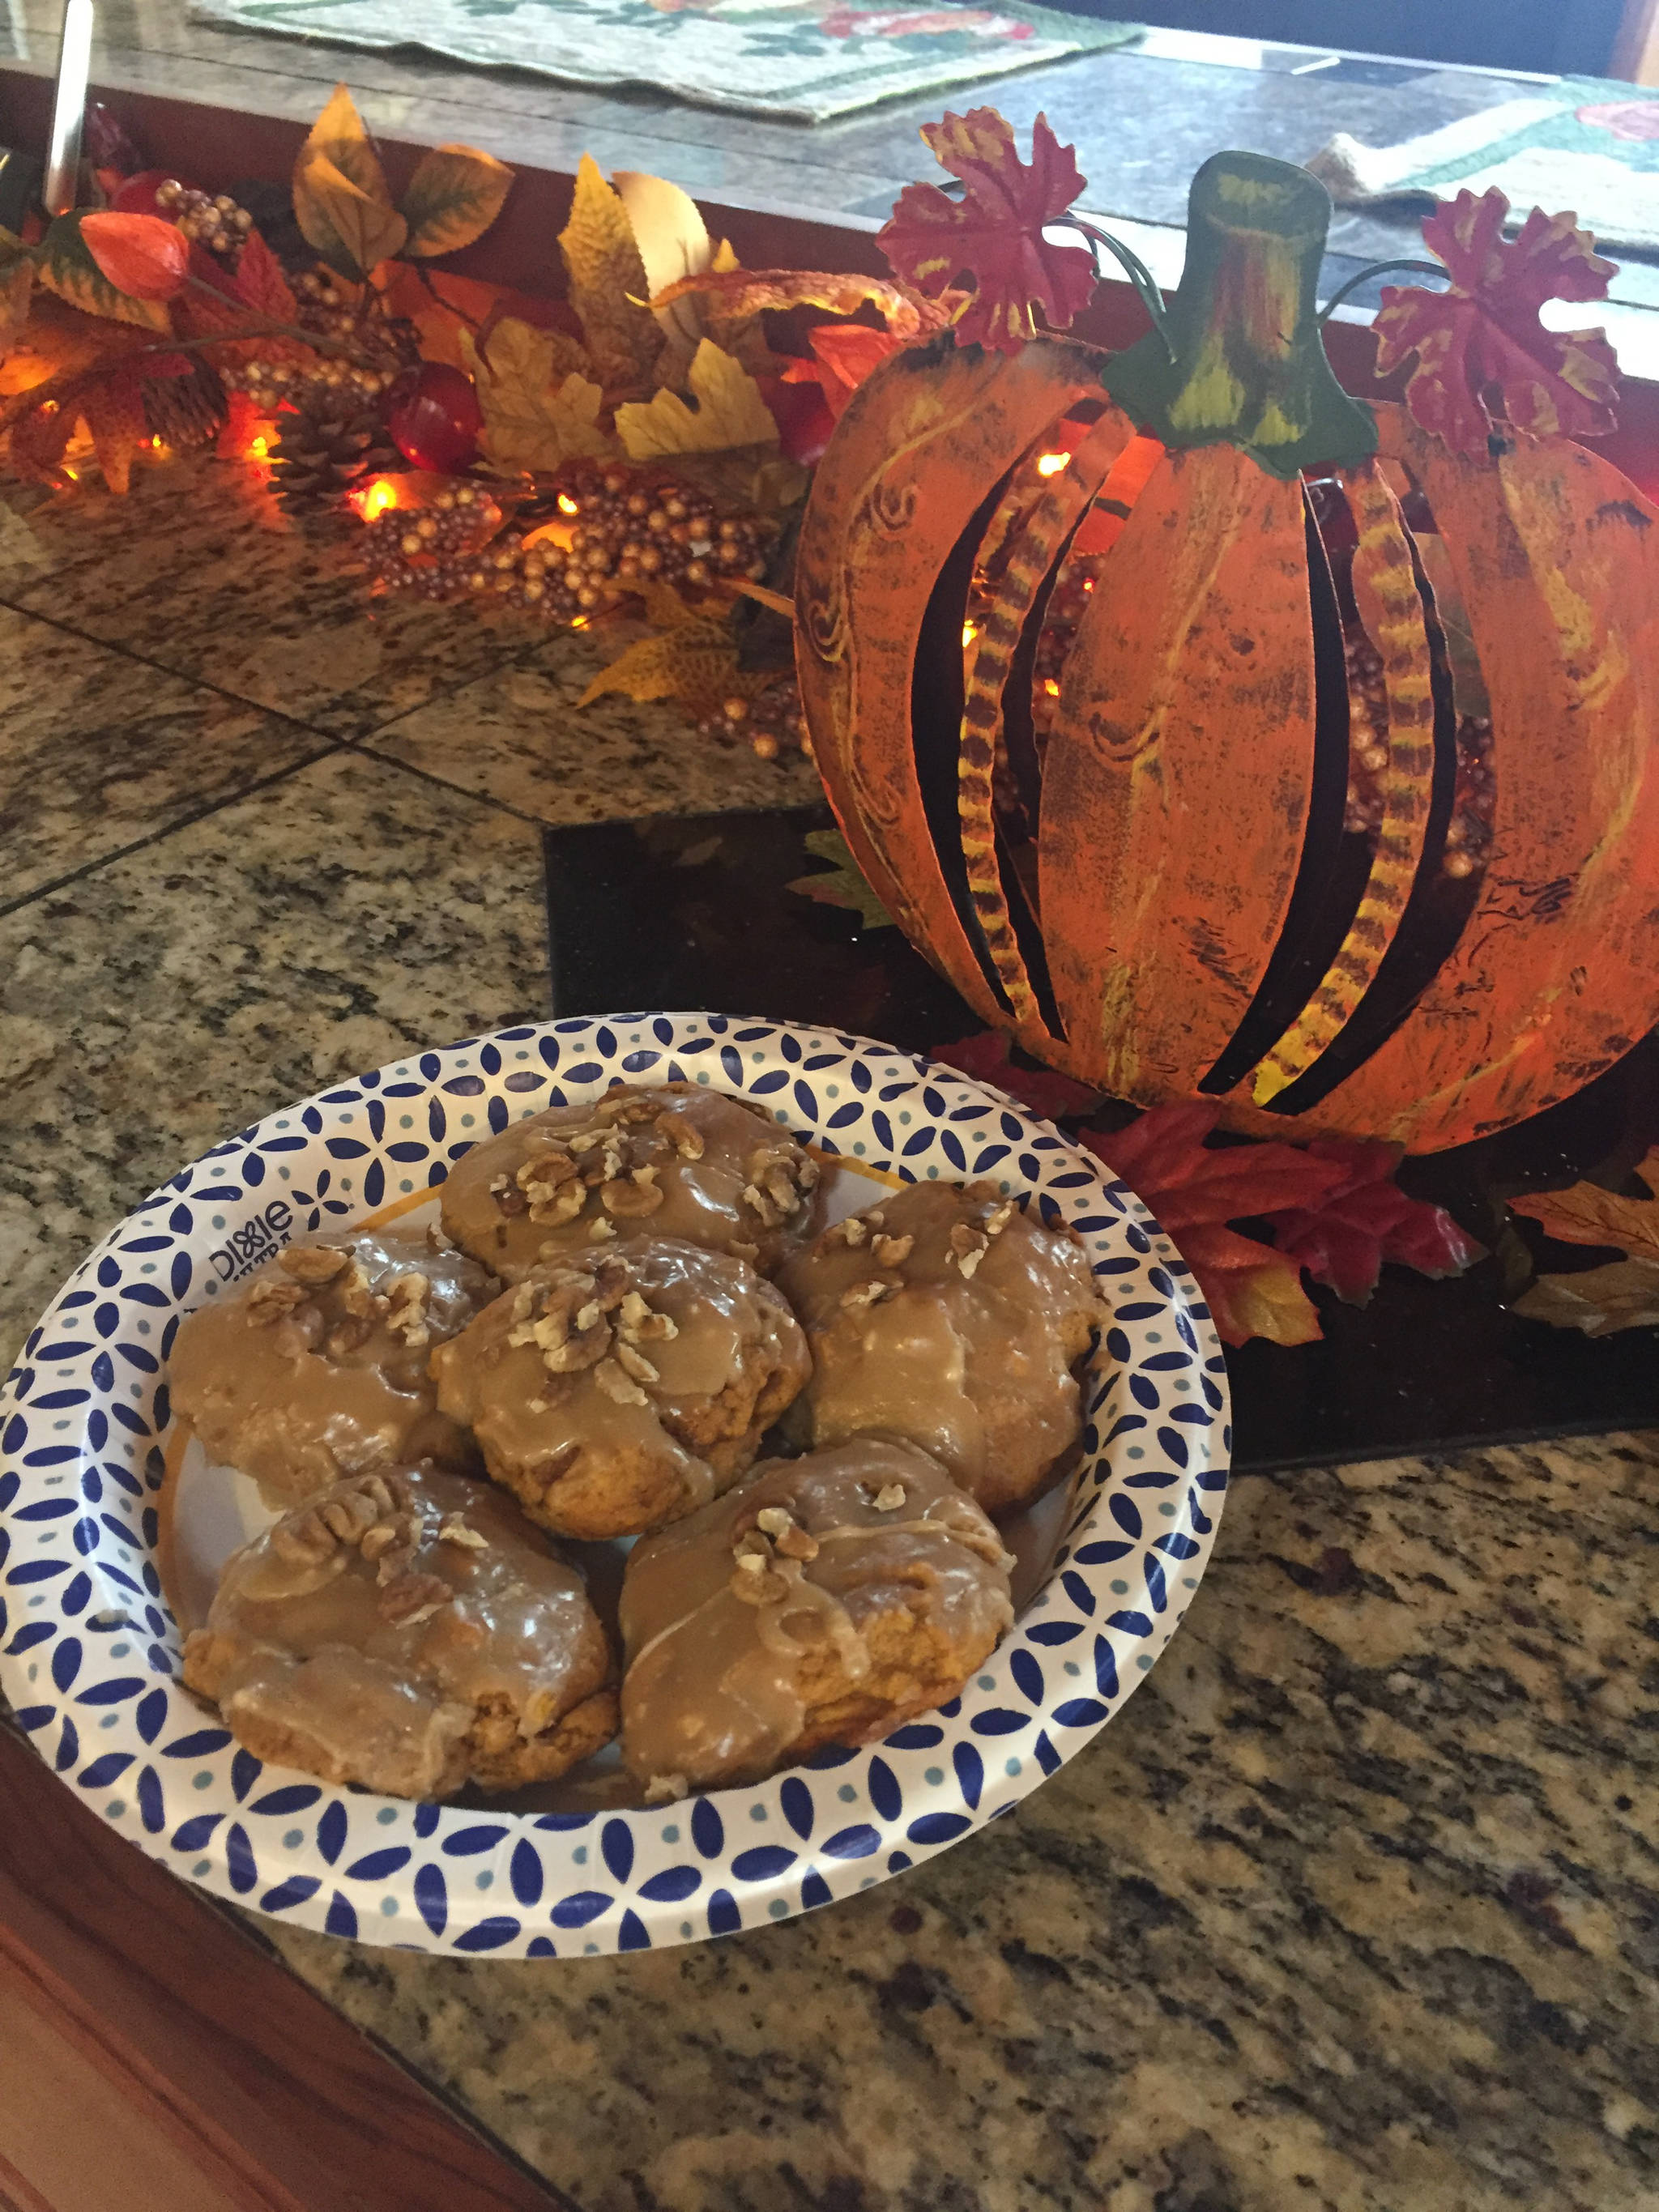 These pumpkin cookies baked by Teri Robl on Oct. 28, 2018, in her Homer, Alaska, kitchen are just the thing for a fall Halloween treat. (Photo by Teri Robl)